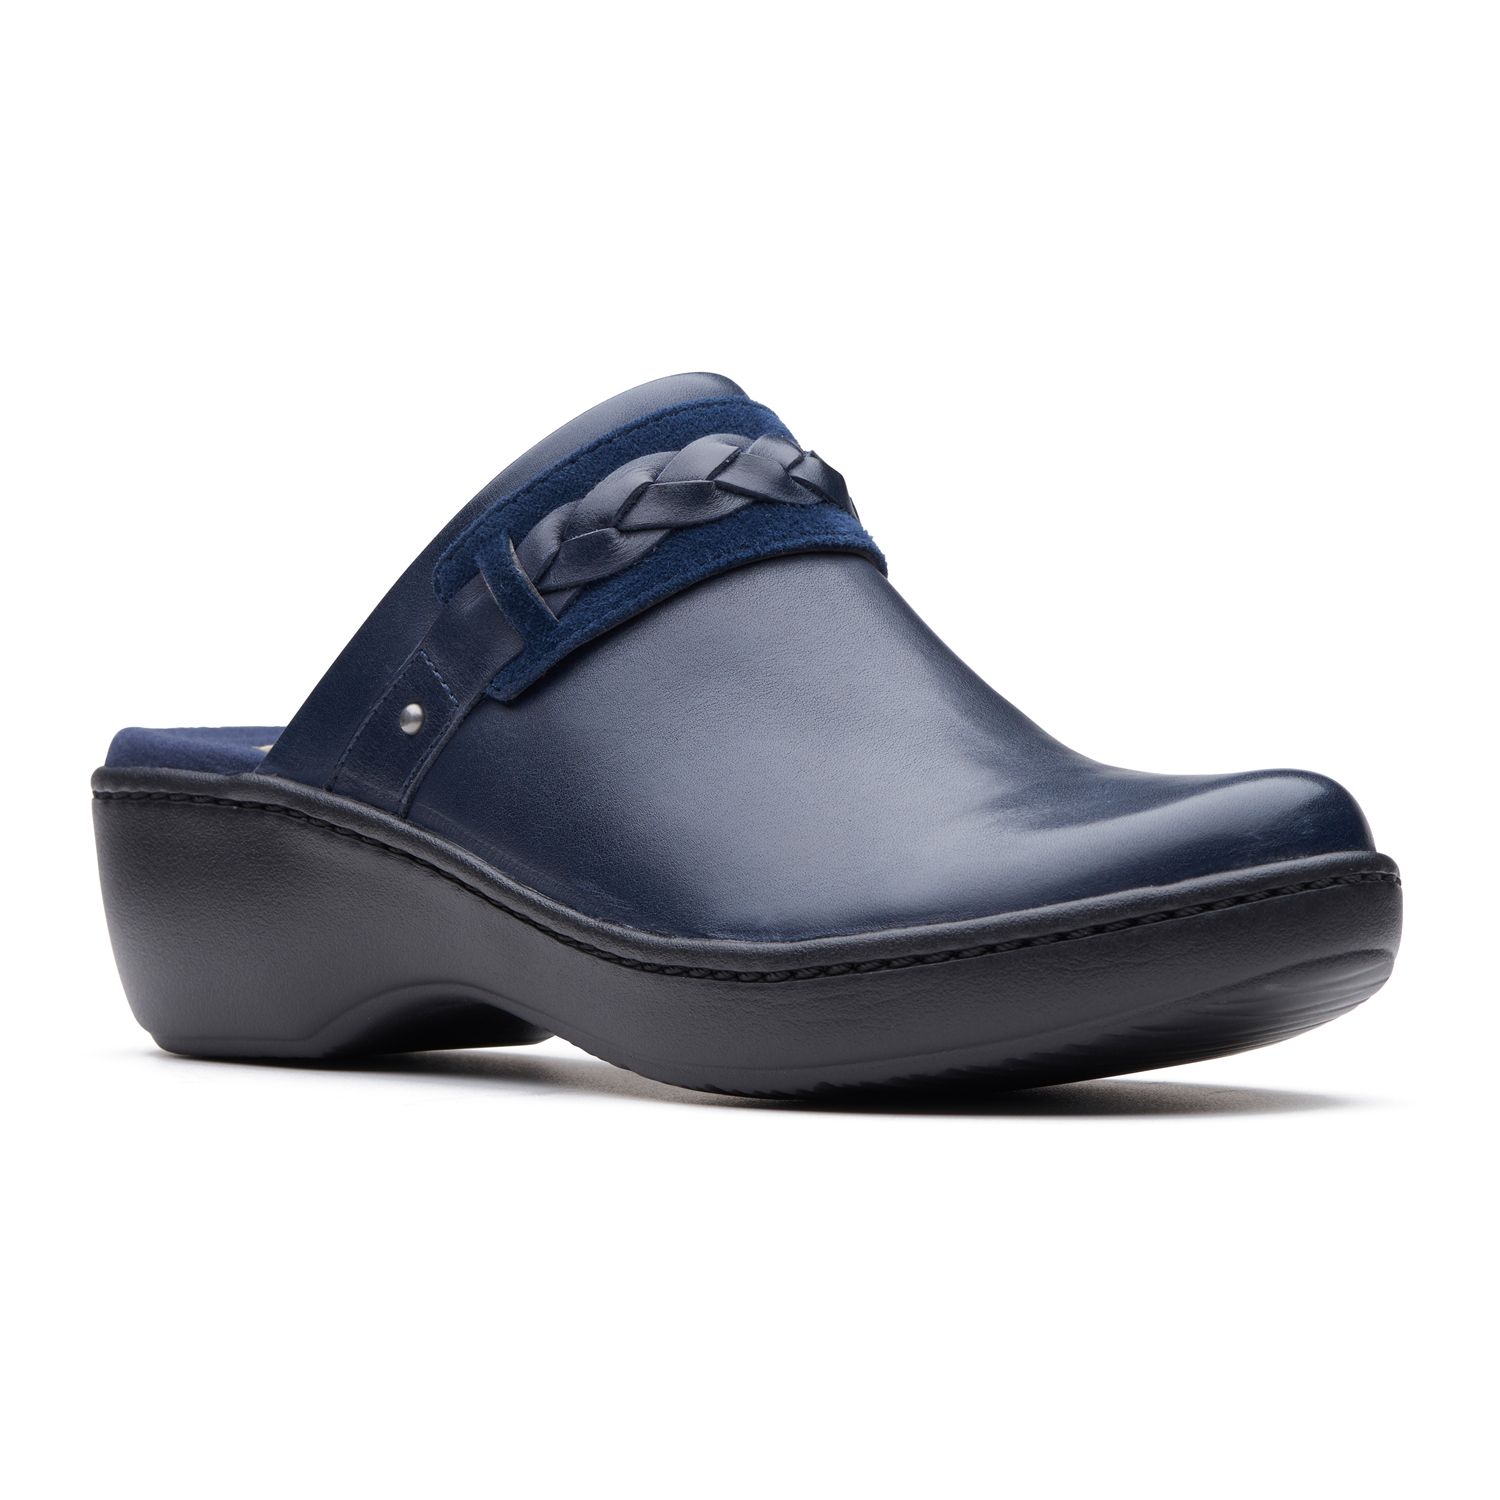 clarks mules on sale